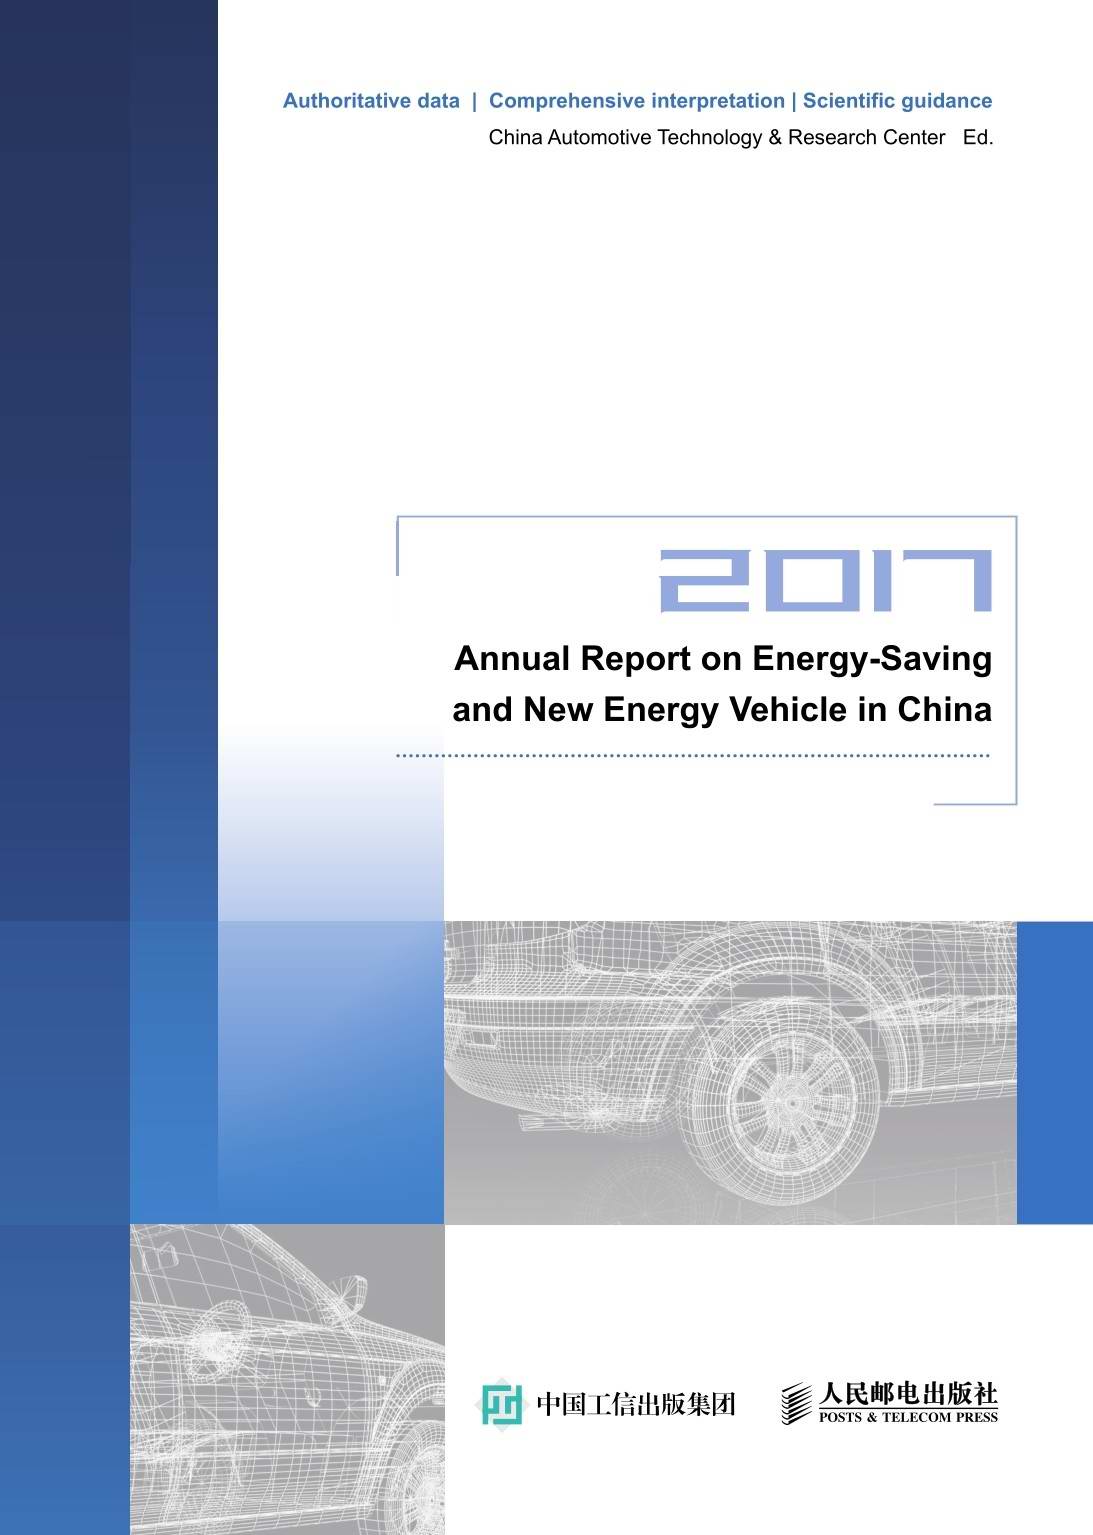 Annual Report on Energy-Saving and New Energy Vehicle in China（2017）